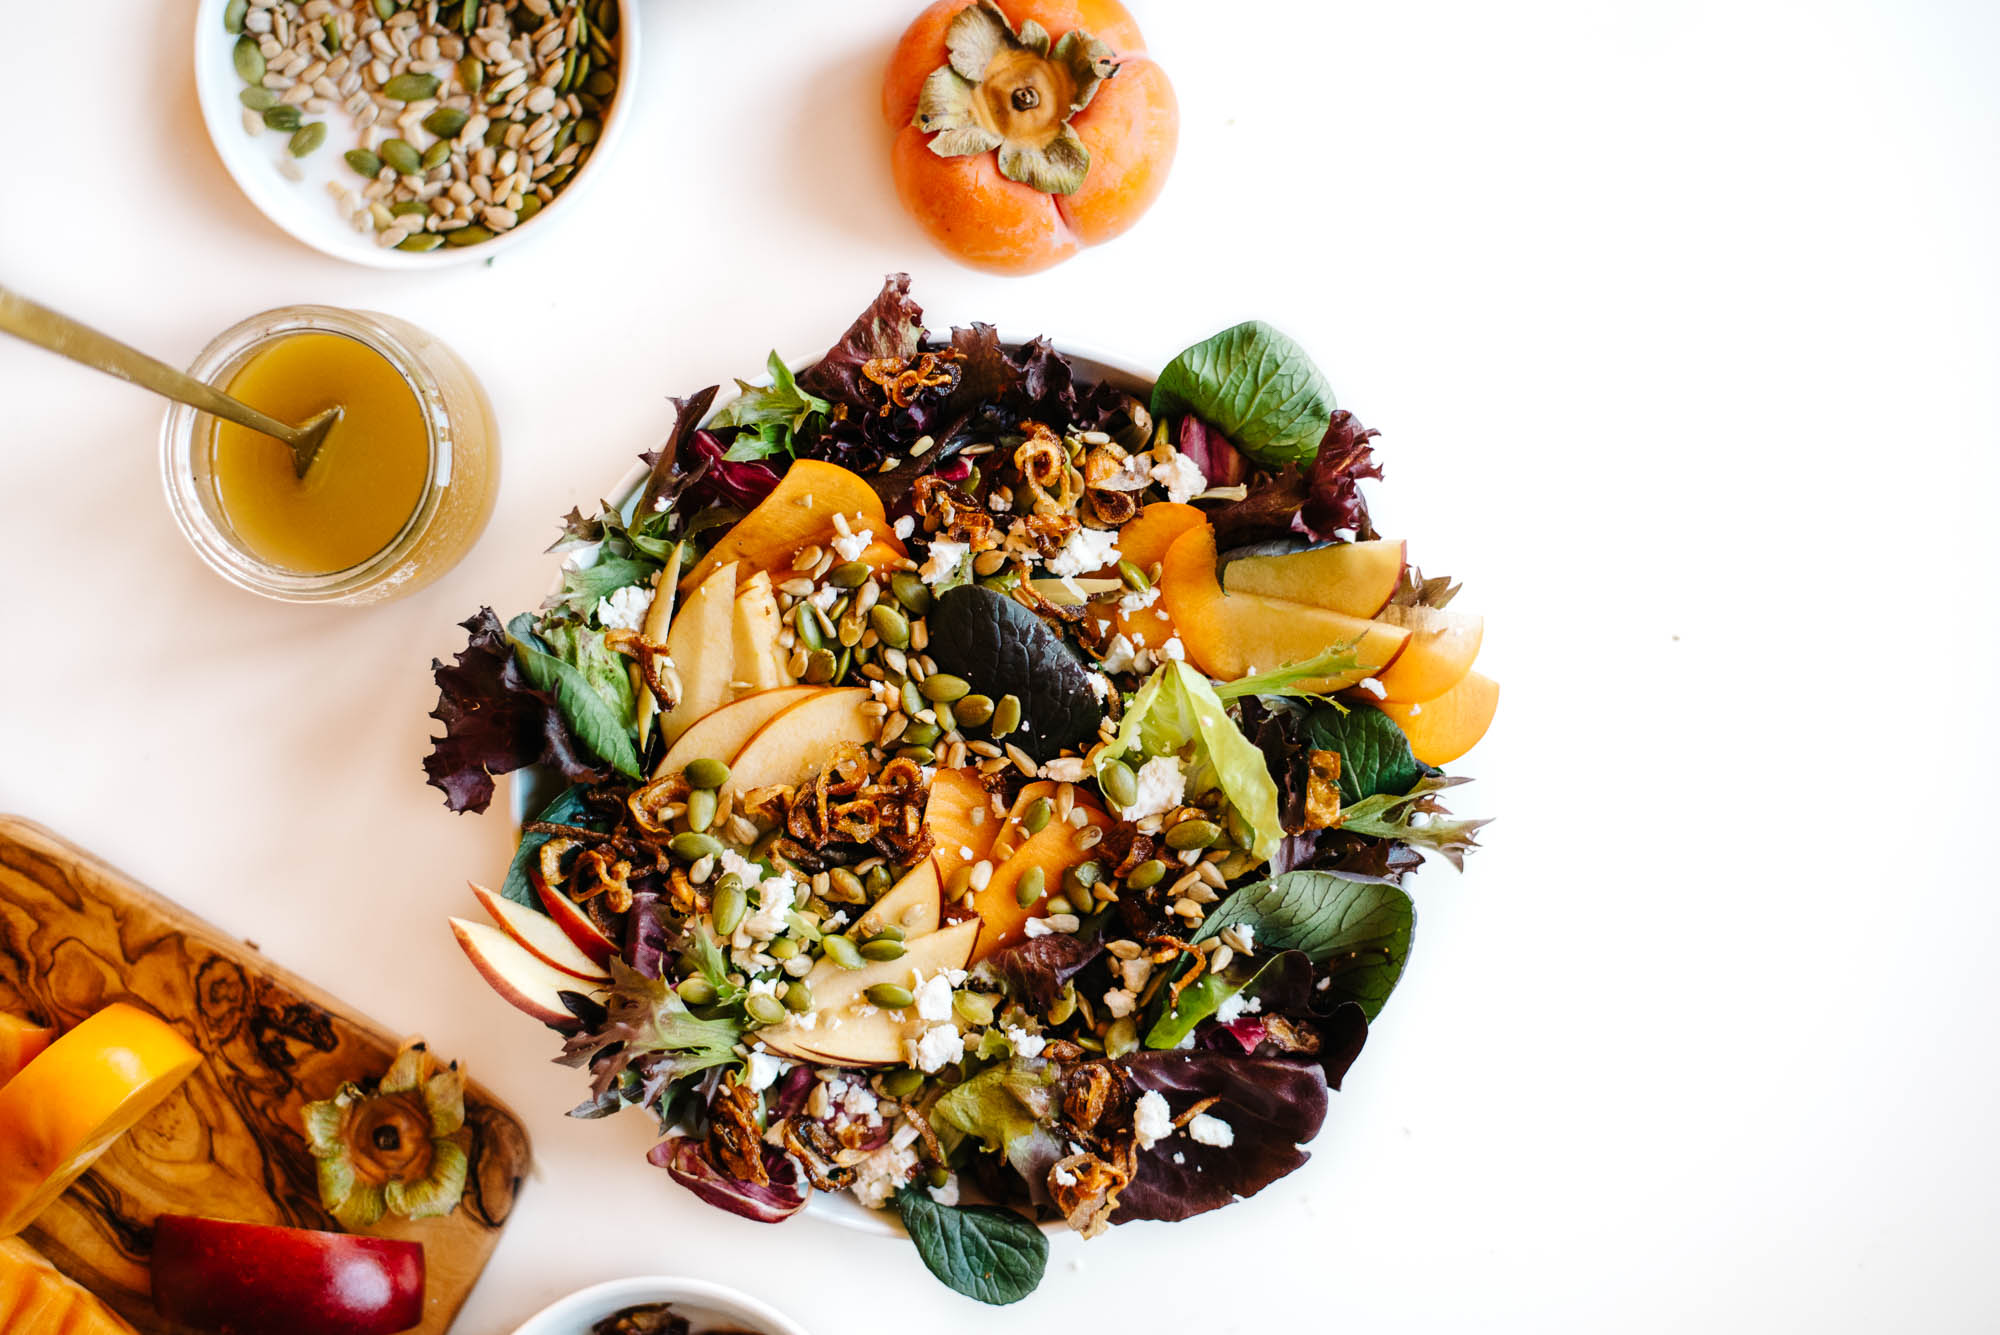 Winter Crunch Salad with Apple, Persimmon, and Toasted Seeds